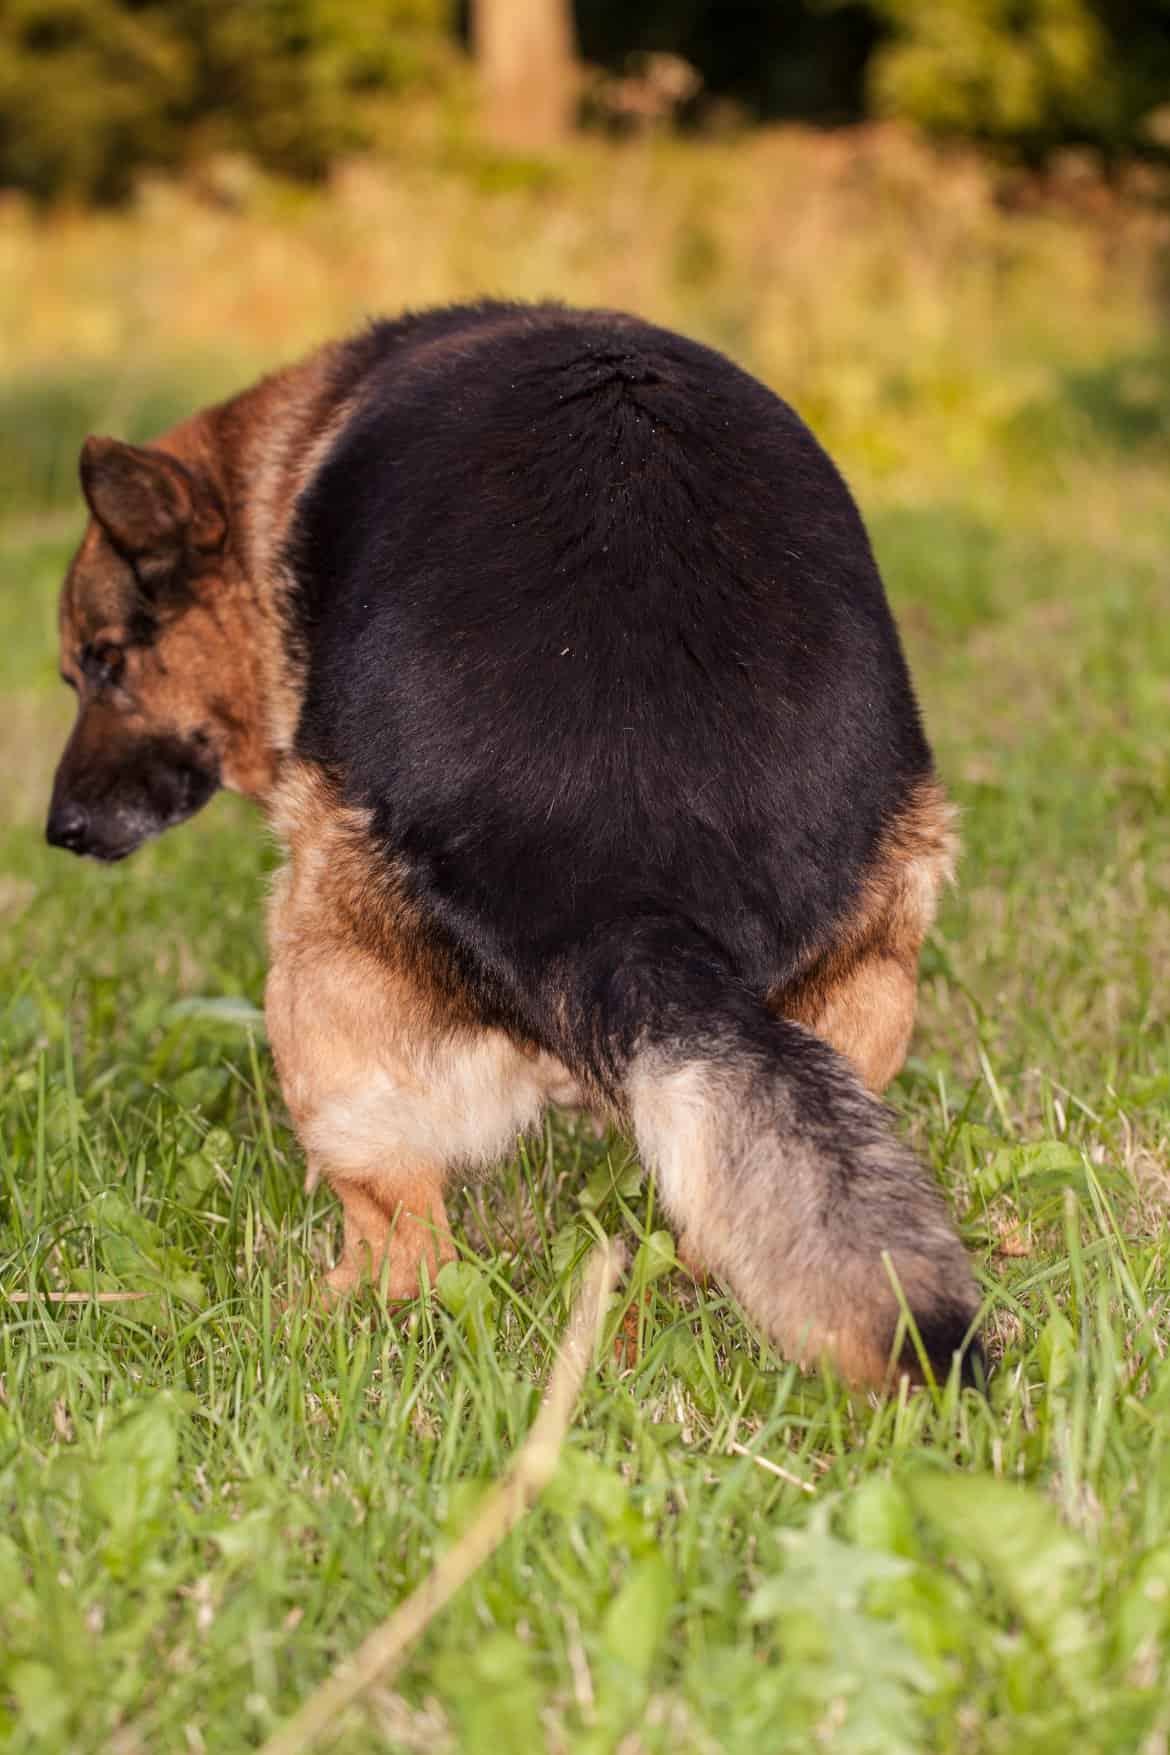 How to know when your dog needs to poop?